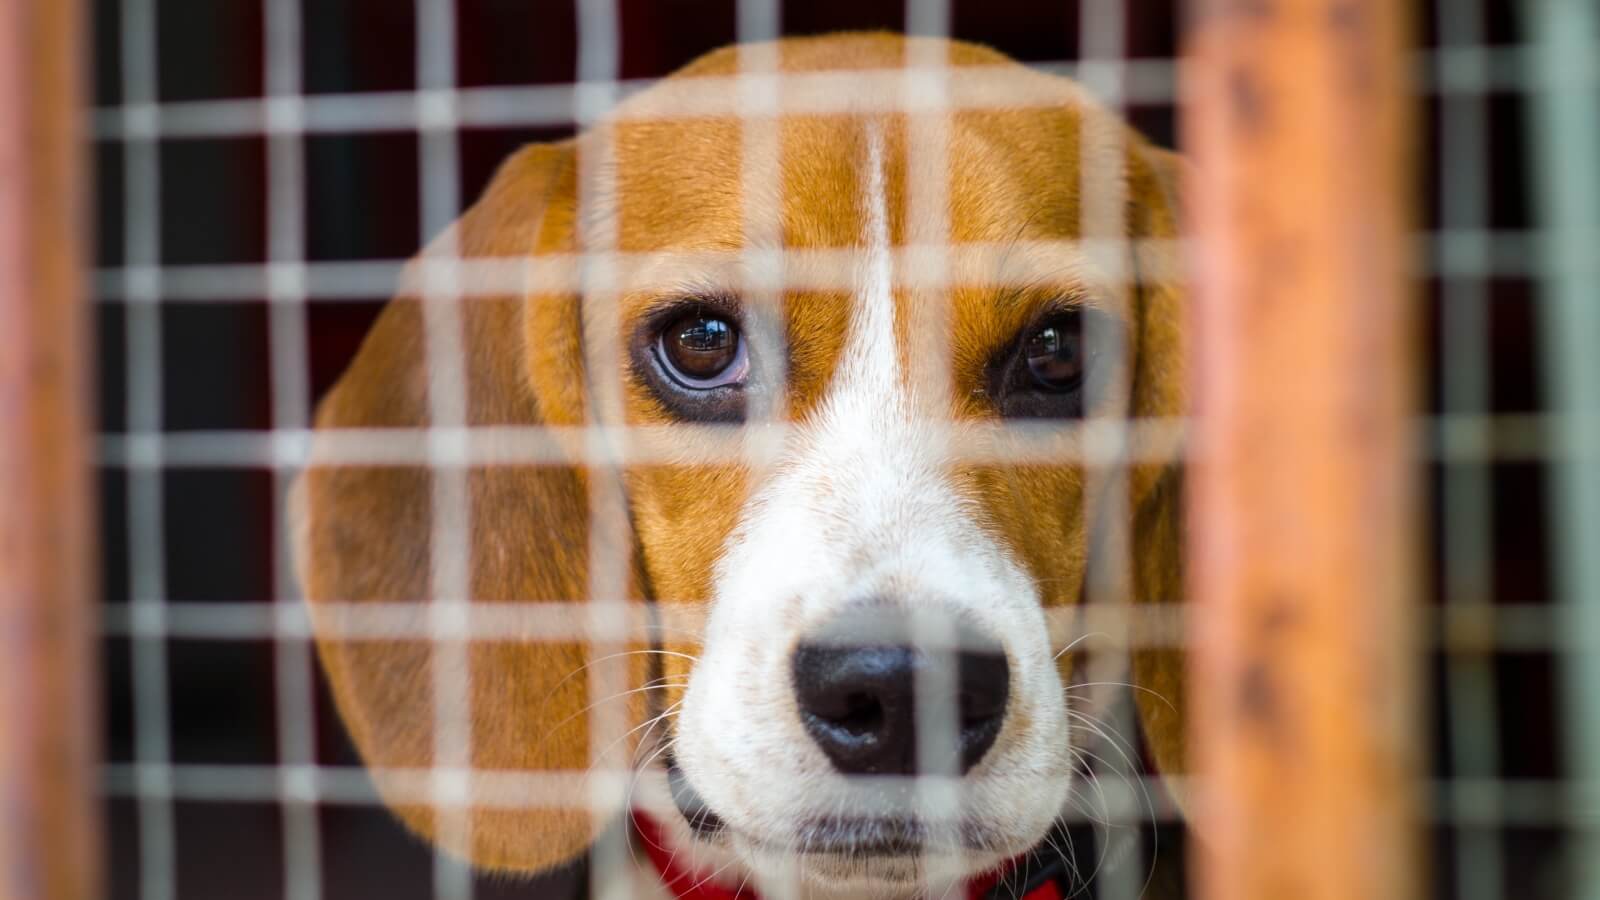 Lab Animals Should Be Rescued, Not Euthanized After Experiments, New Bill Urges